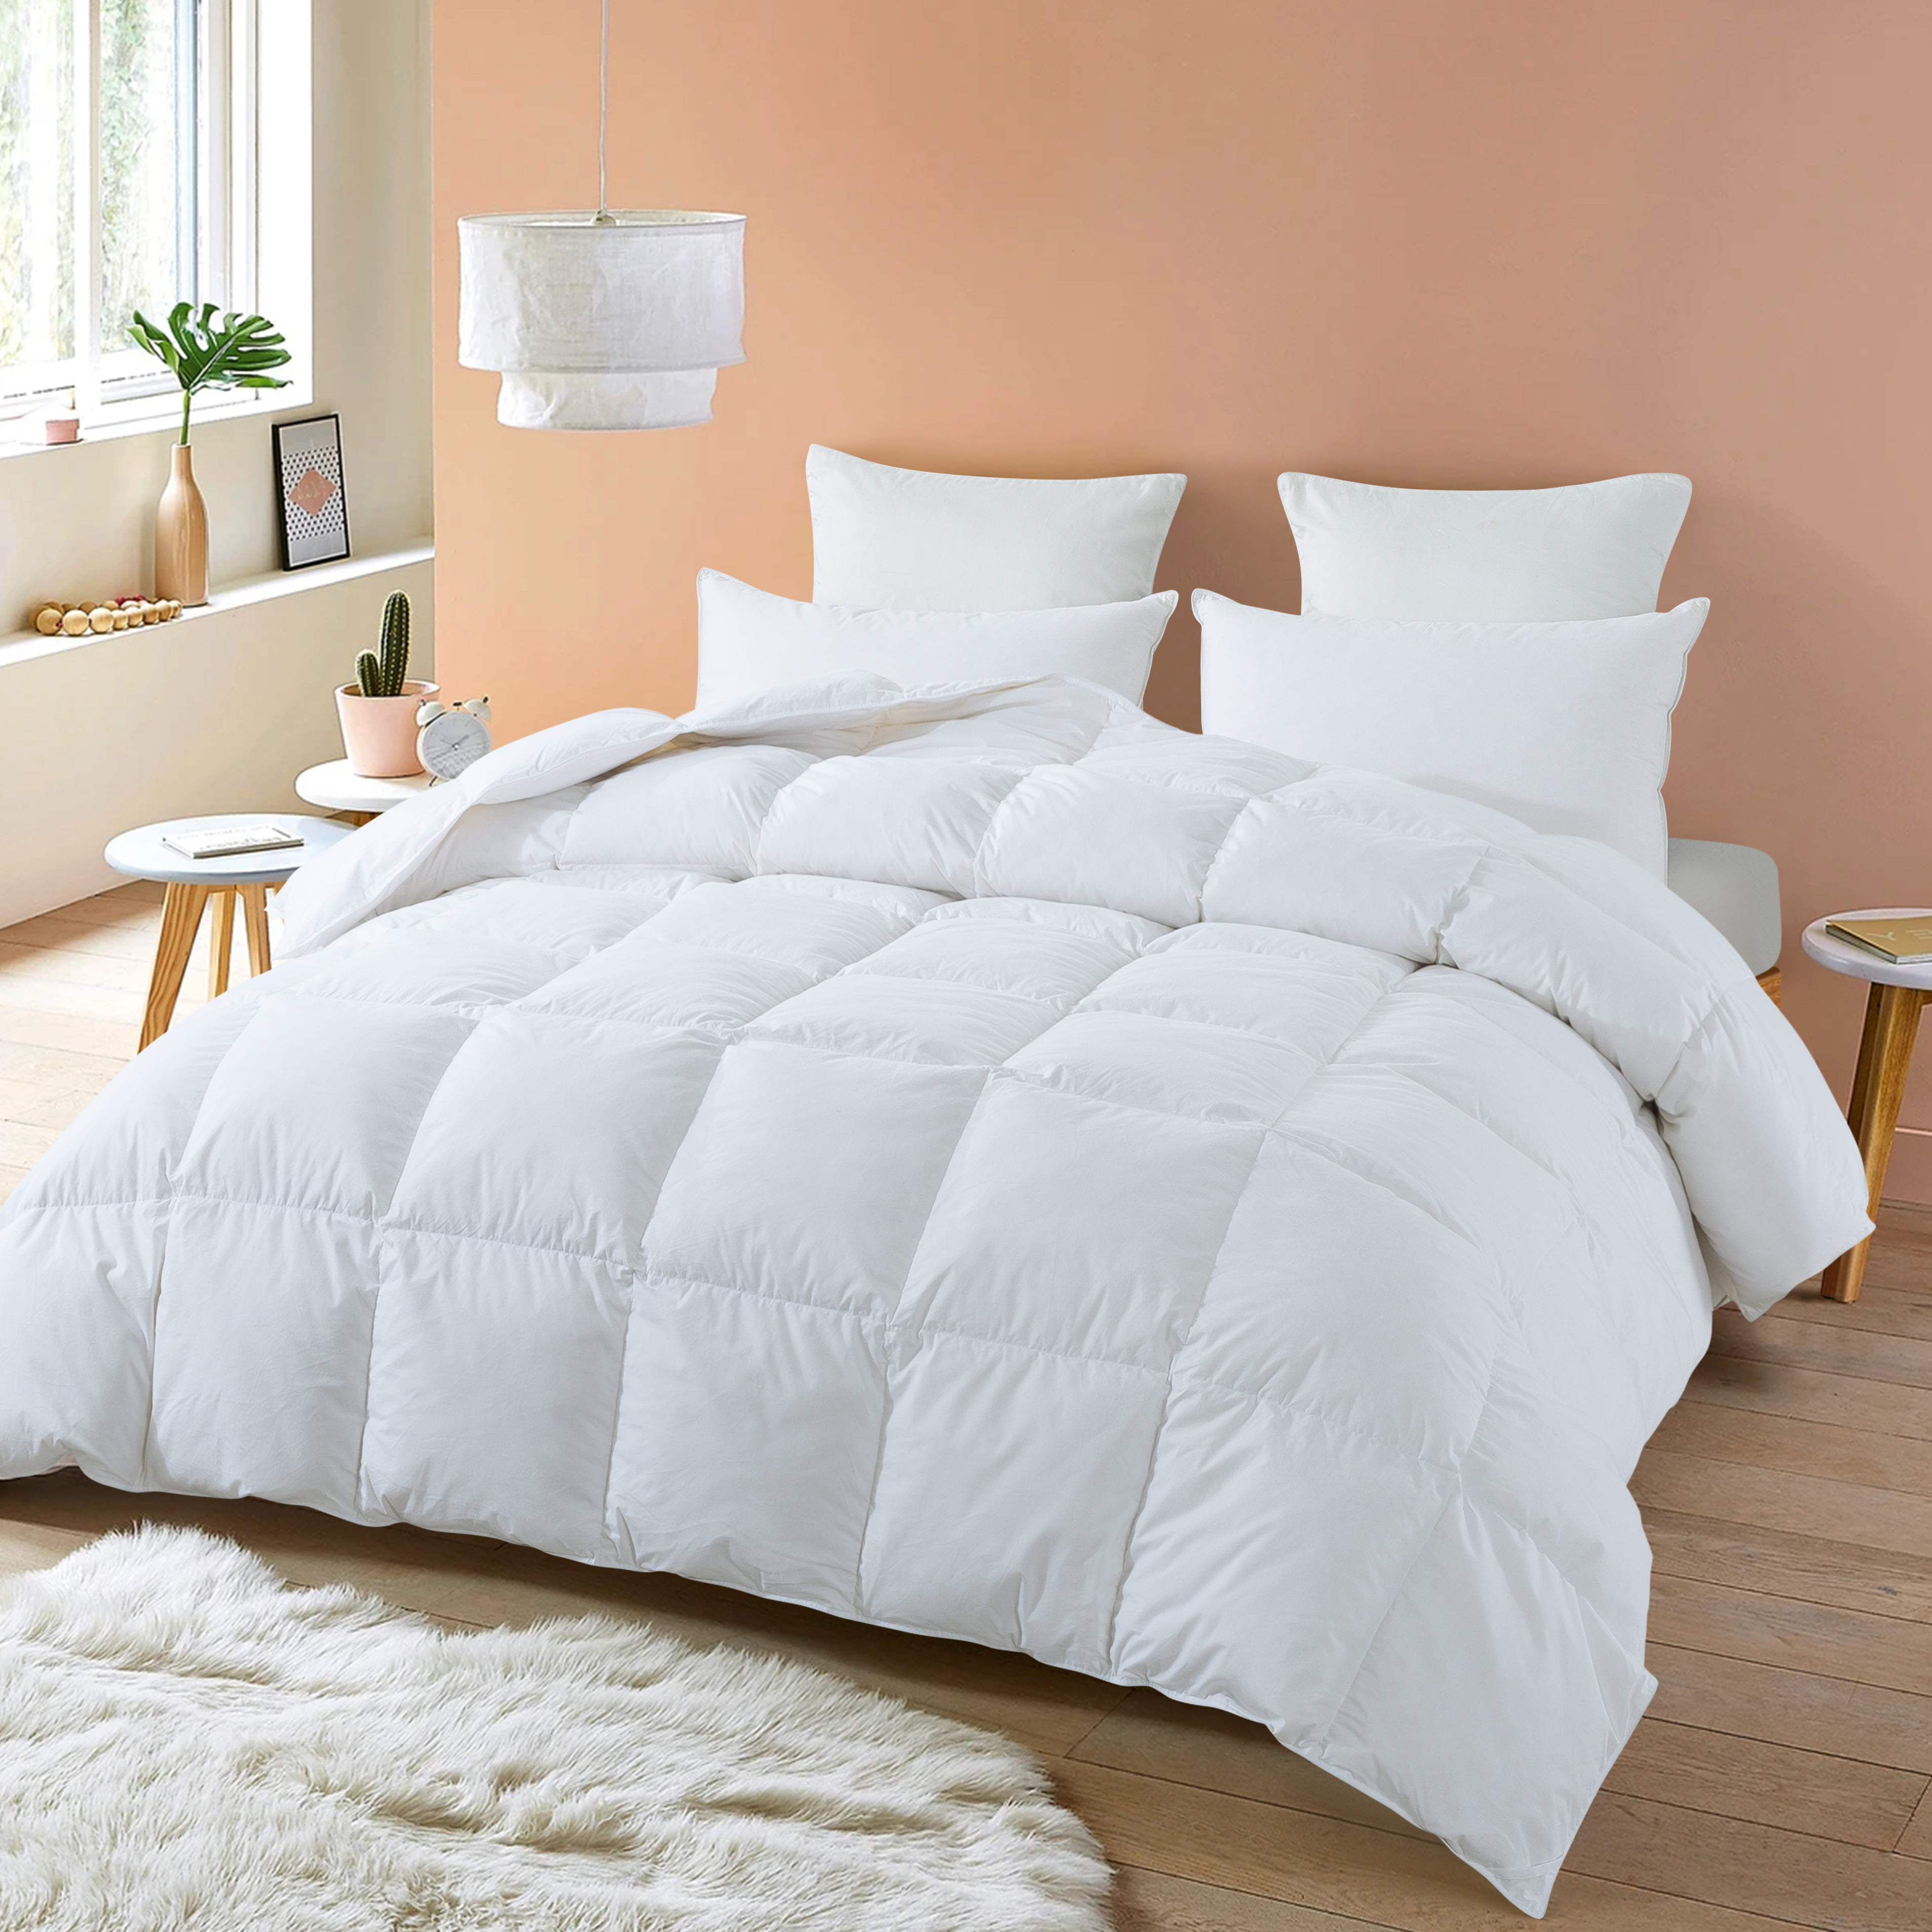 Duck Feather & Down Duvets Super Soft Comfy Quilts Bedding All Sizes in 13.5 Tog 